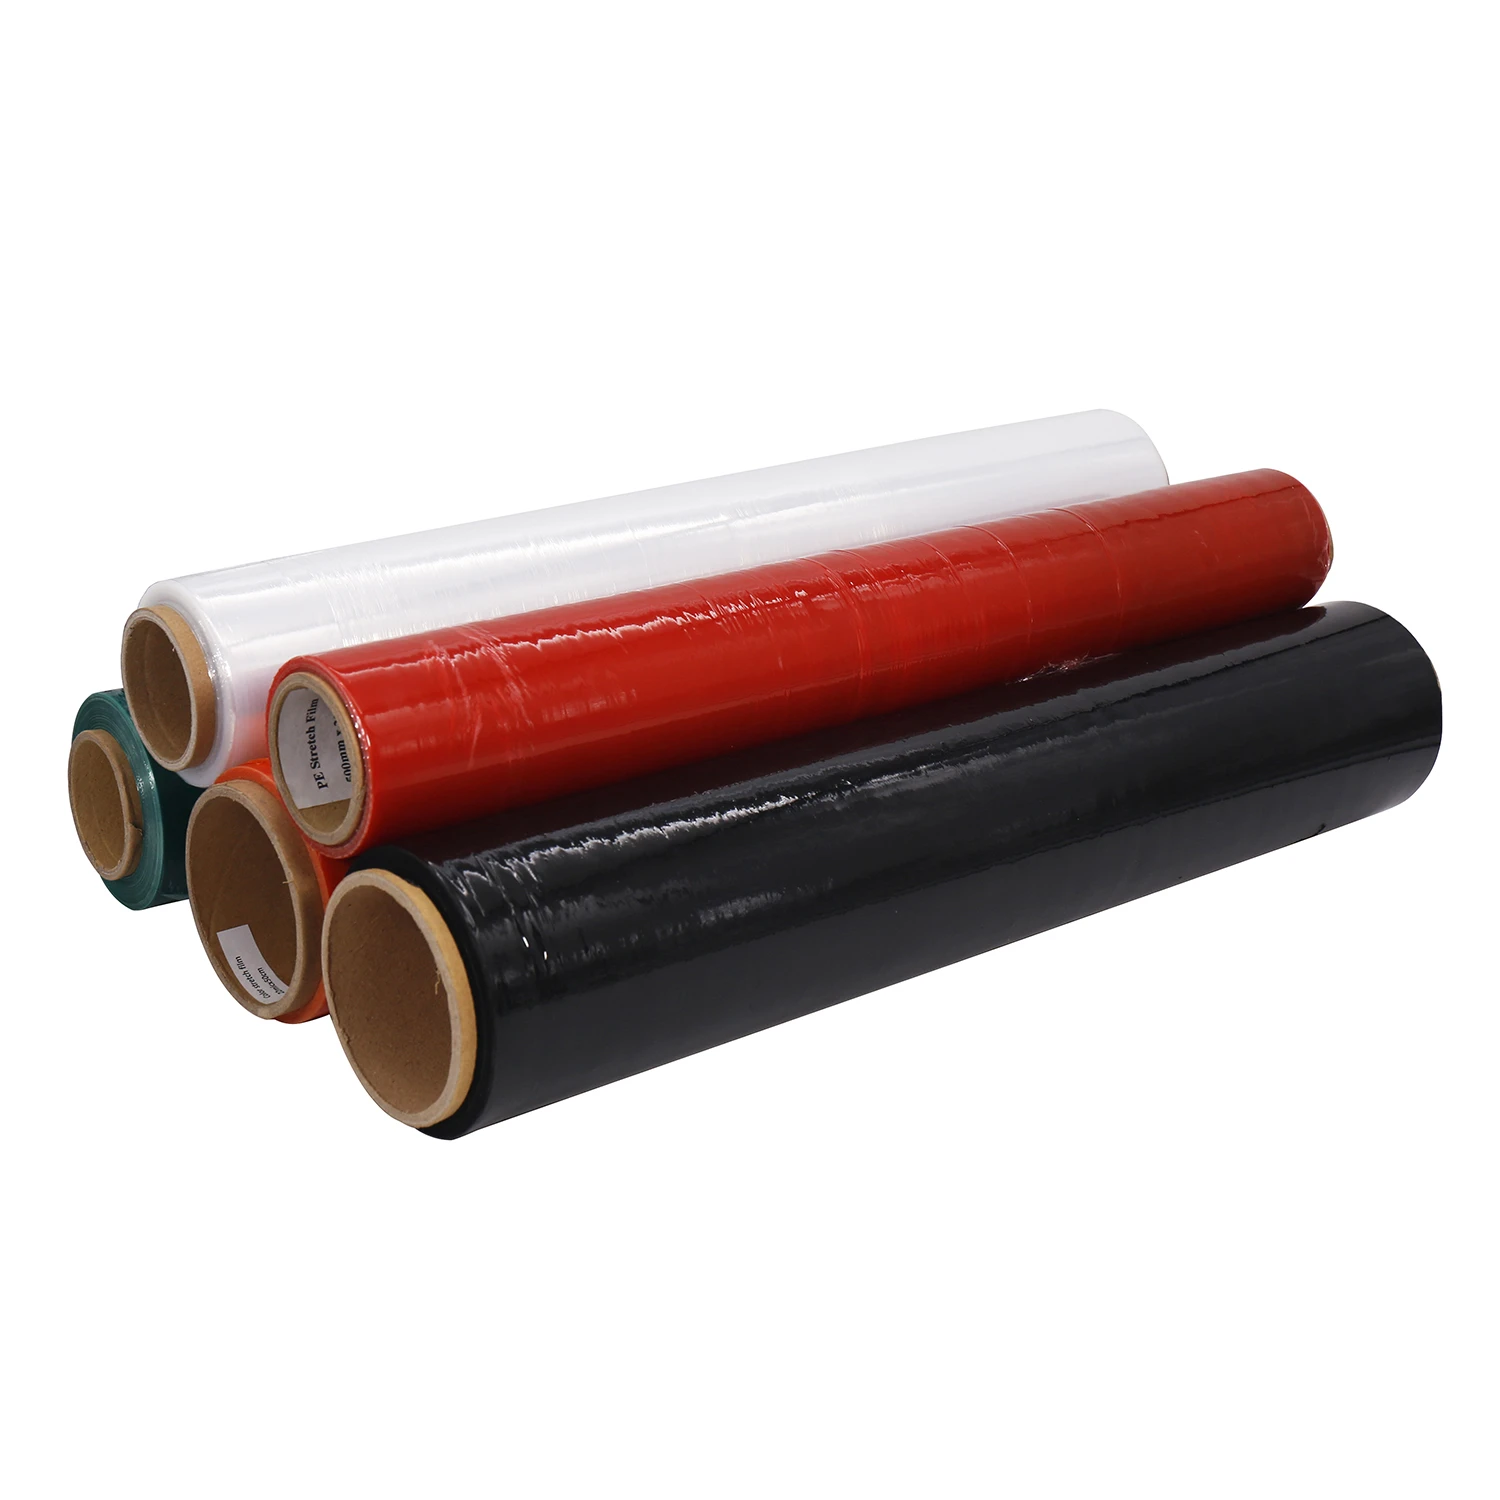 23 micron Black LLDPE Stretch Film Manufacturer China/Linear Low Density Polyethylene/Stretch Wrapping Film